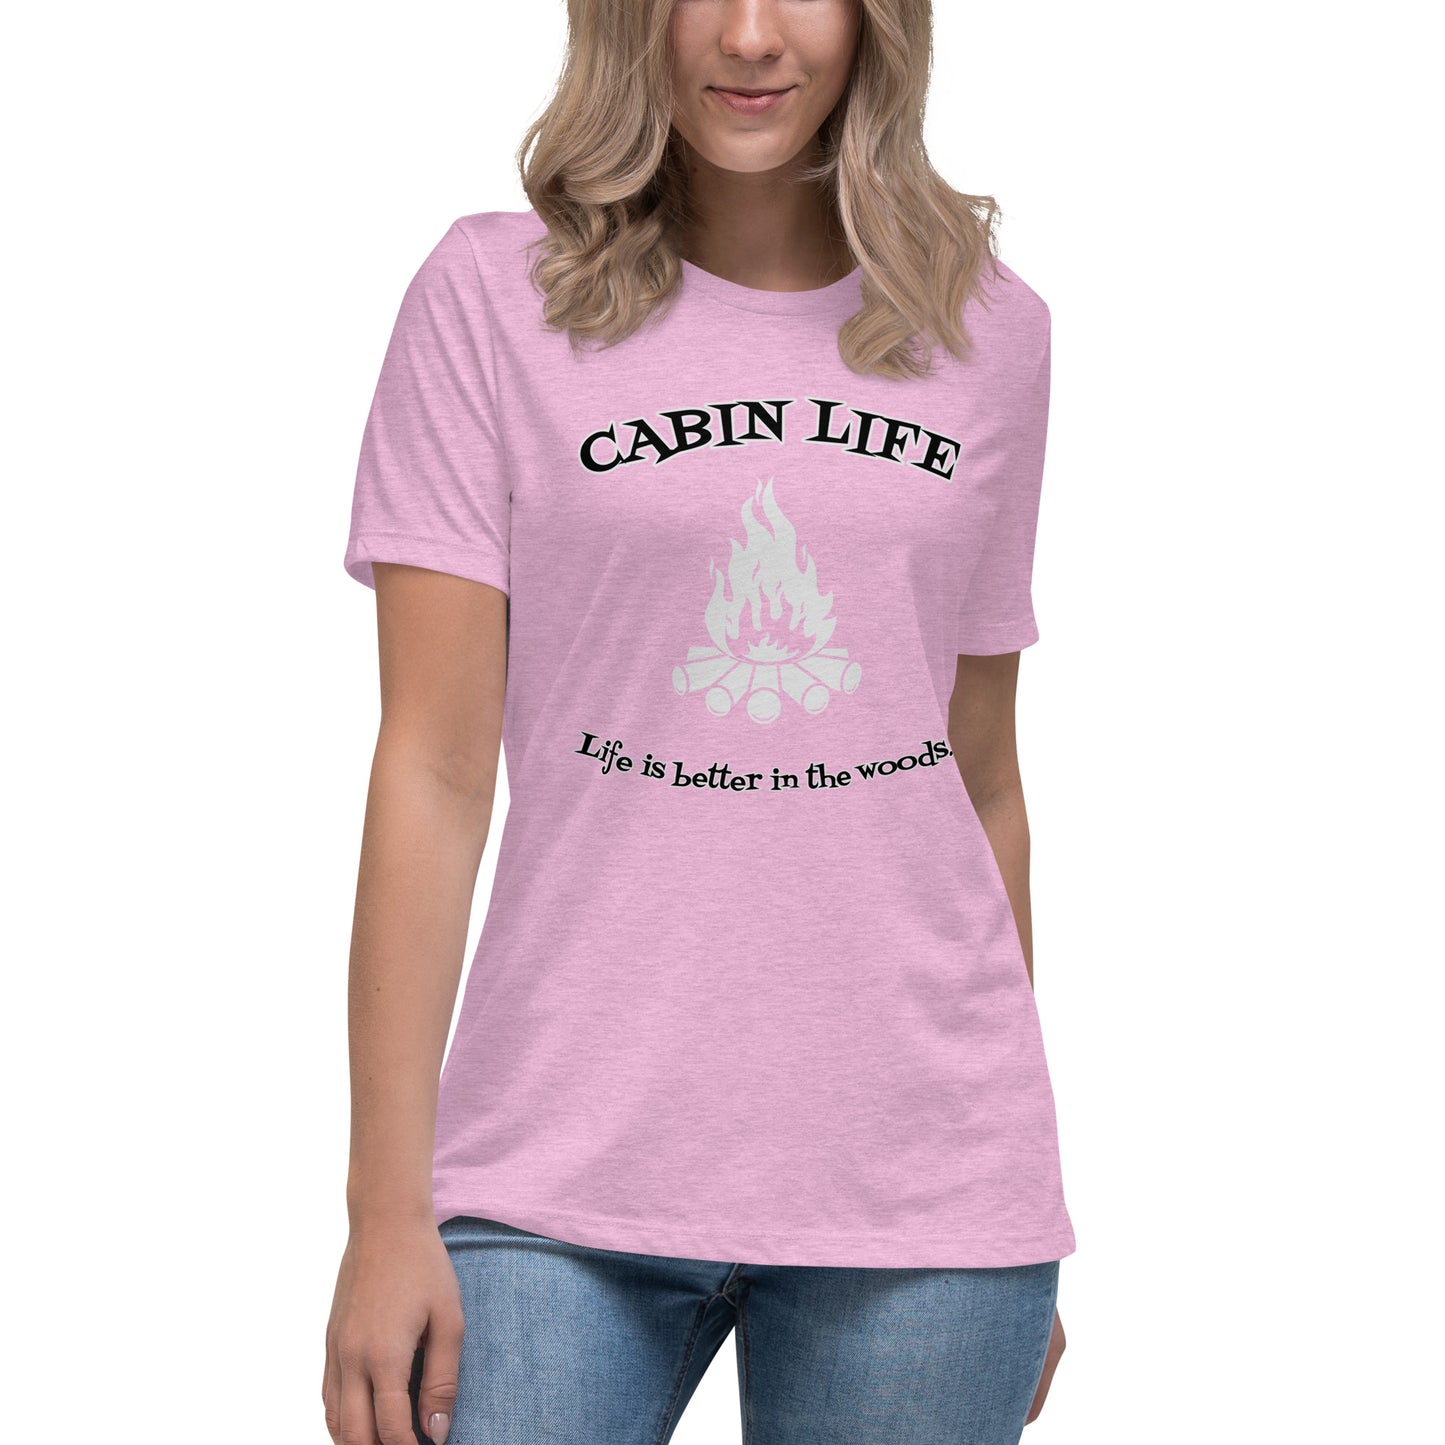 Cabin Life - Life is better in the woods womens tee (gray design)